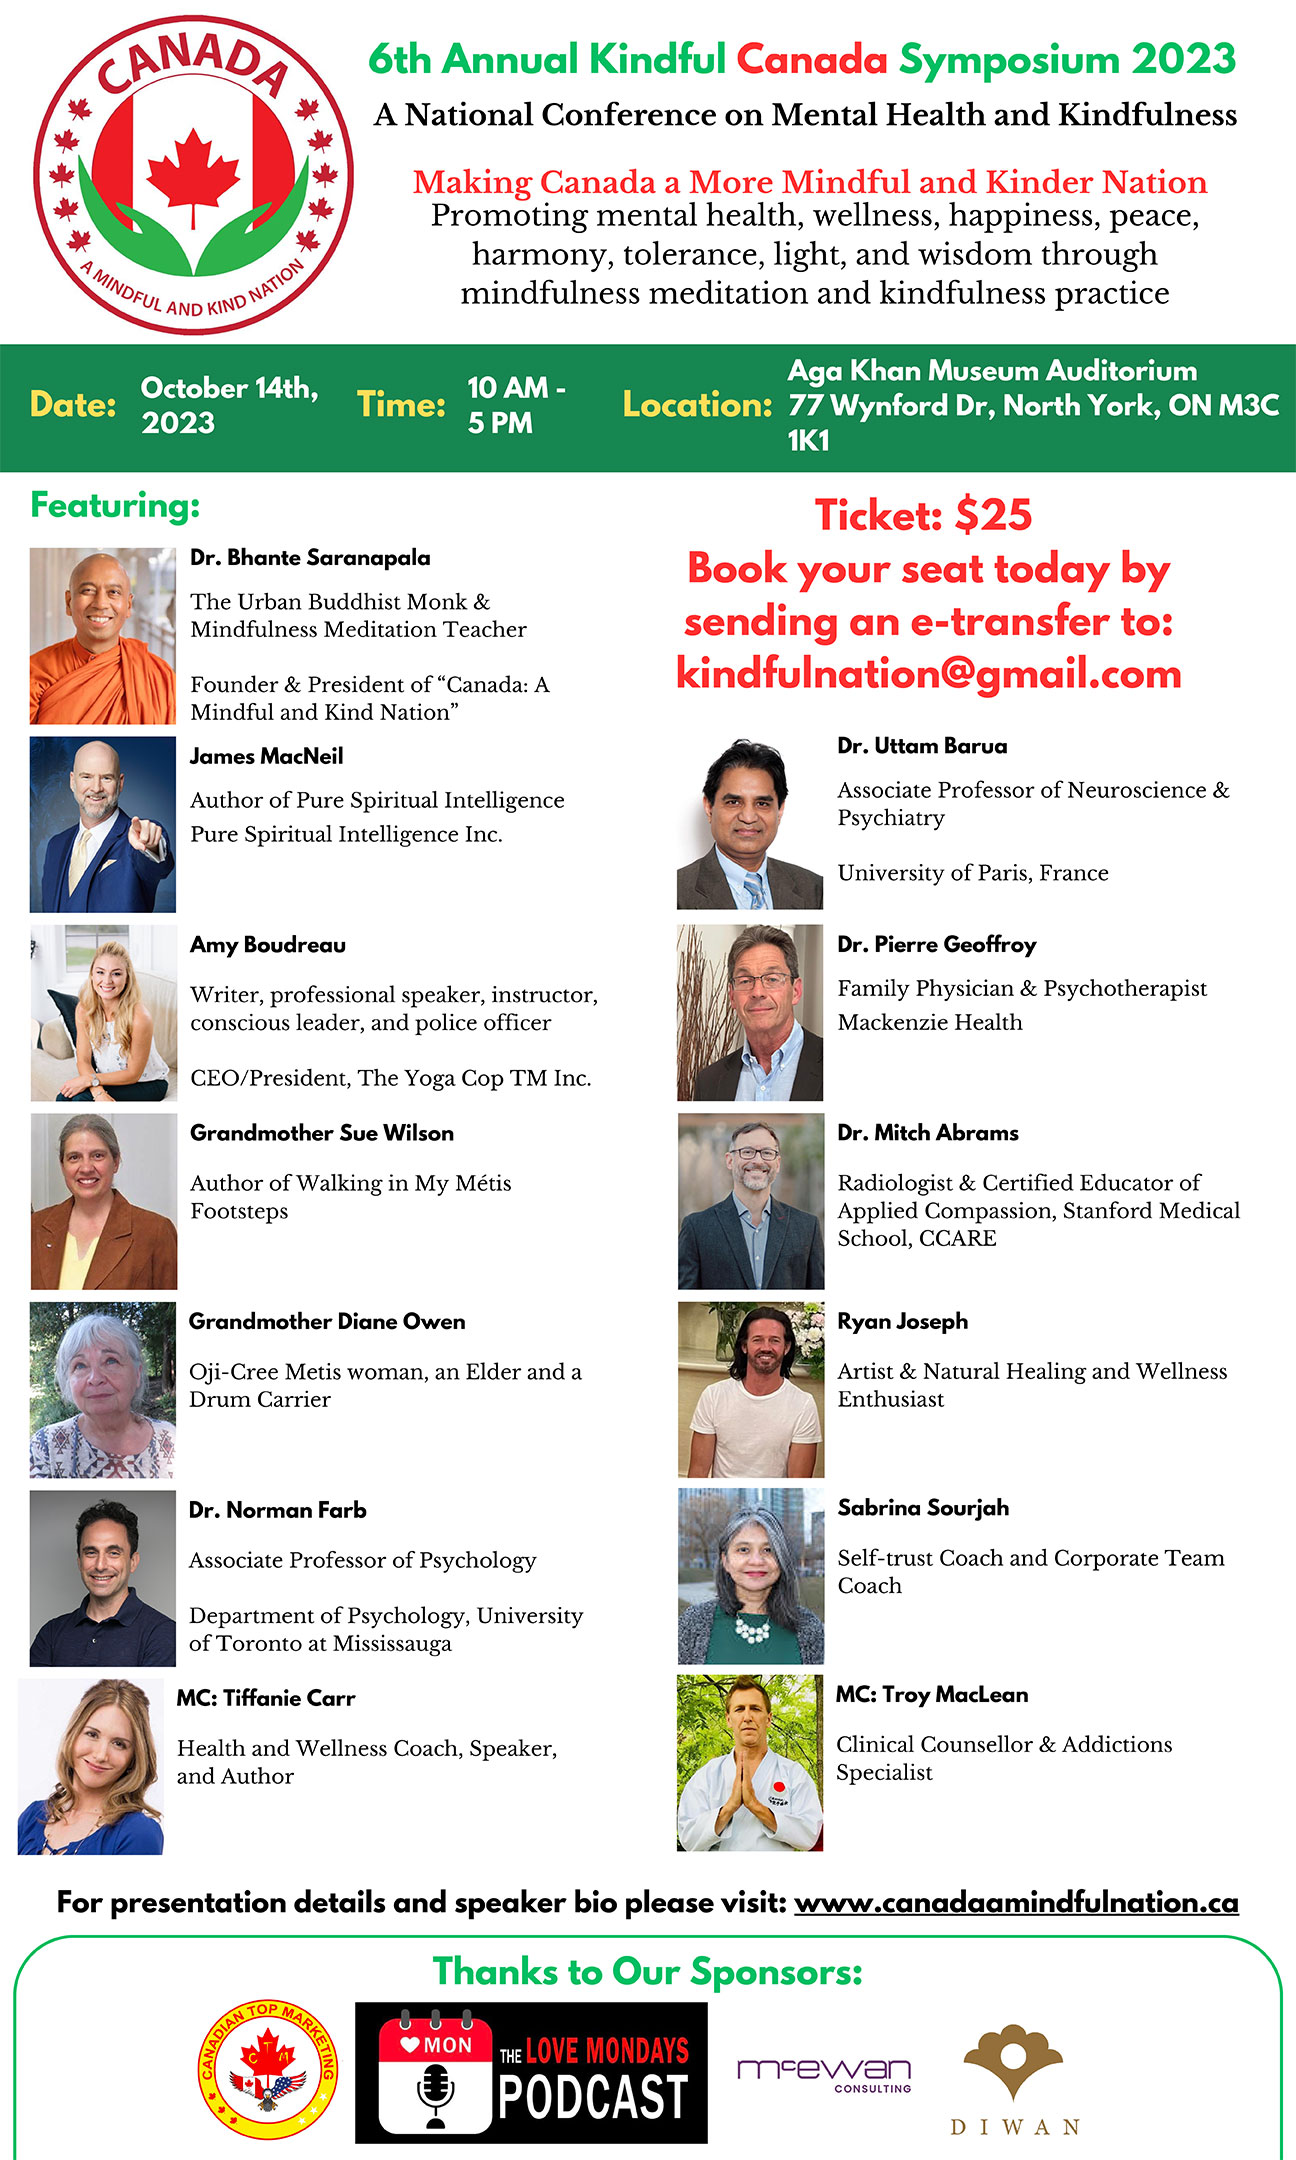 6th Annual Kindful Canada Symposium: A National Conference on Mental Health and Kindfulness 2023